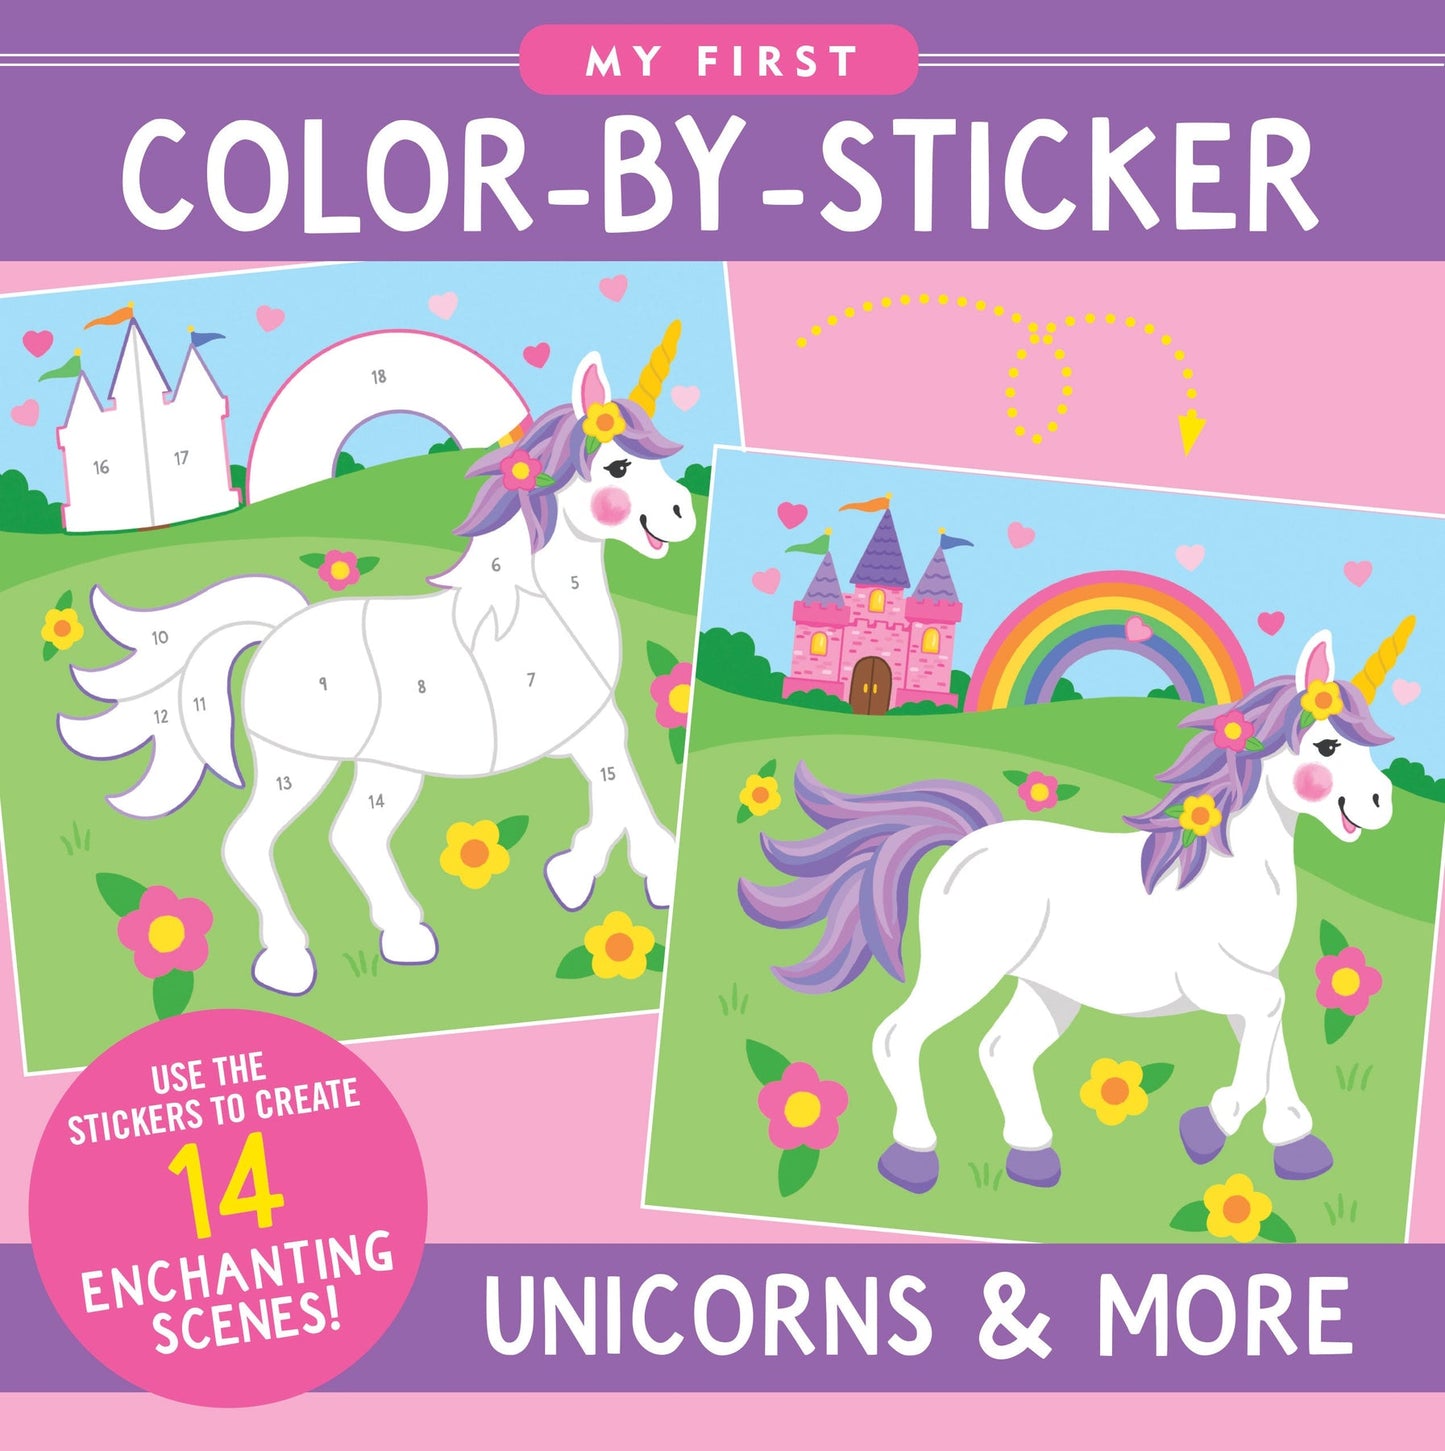 Peter Pauper Press - My First Color-by-Sticker Book